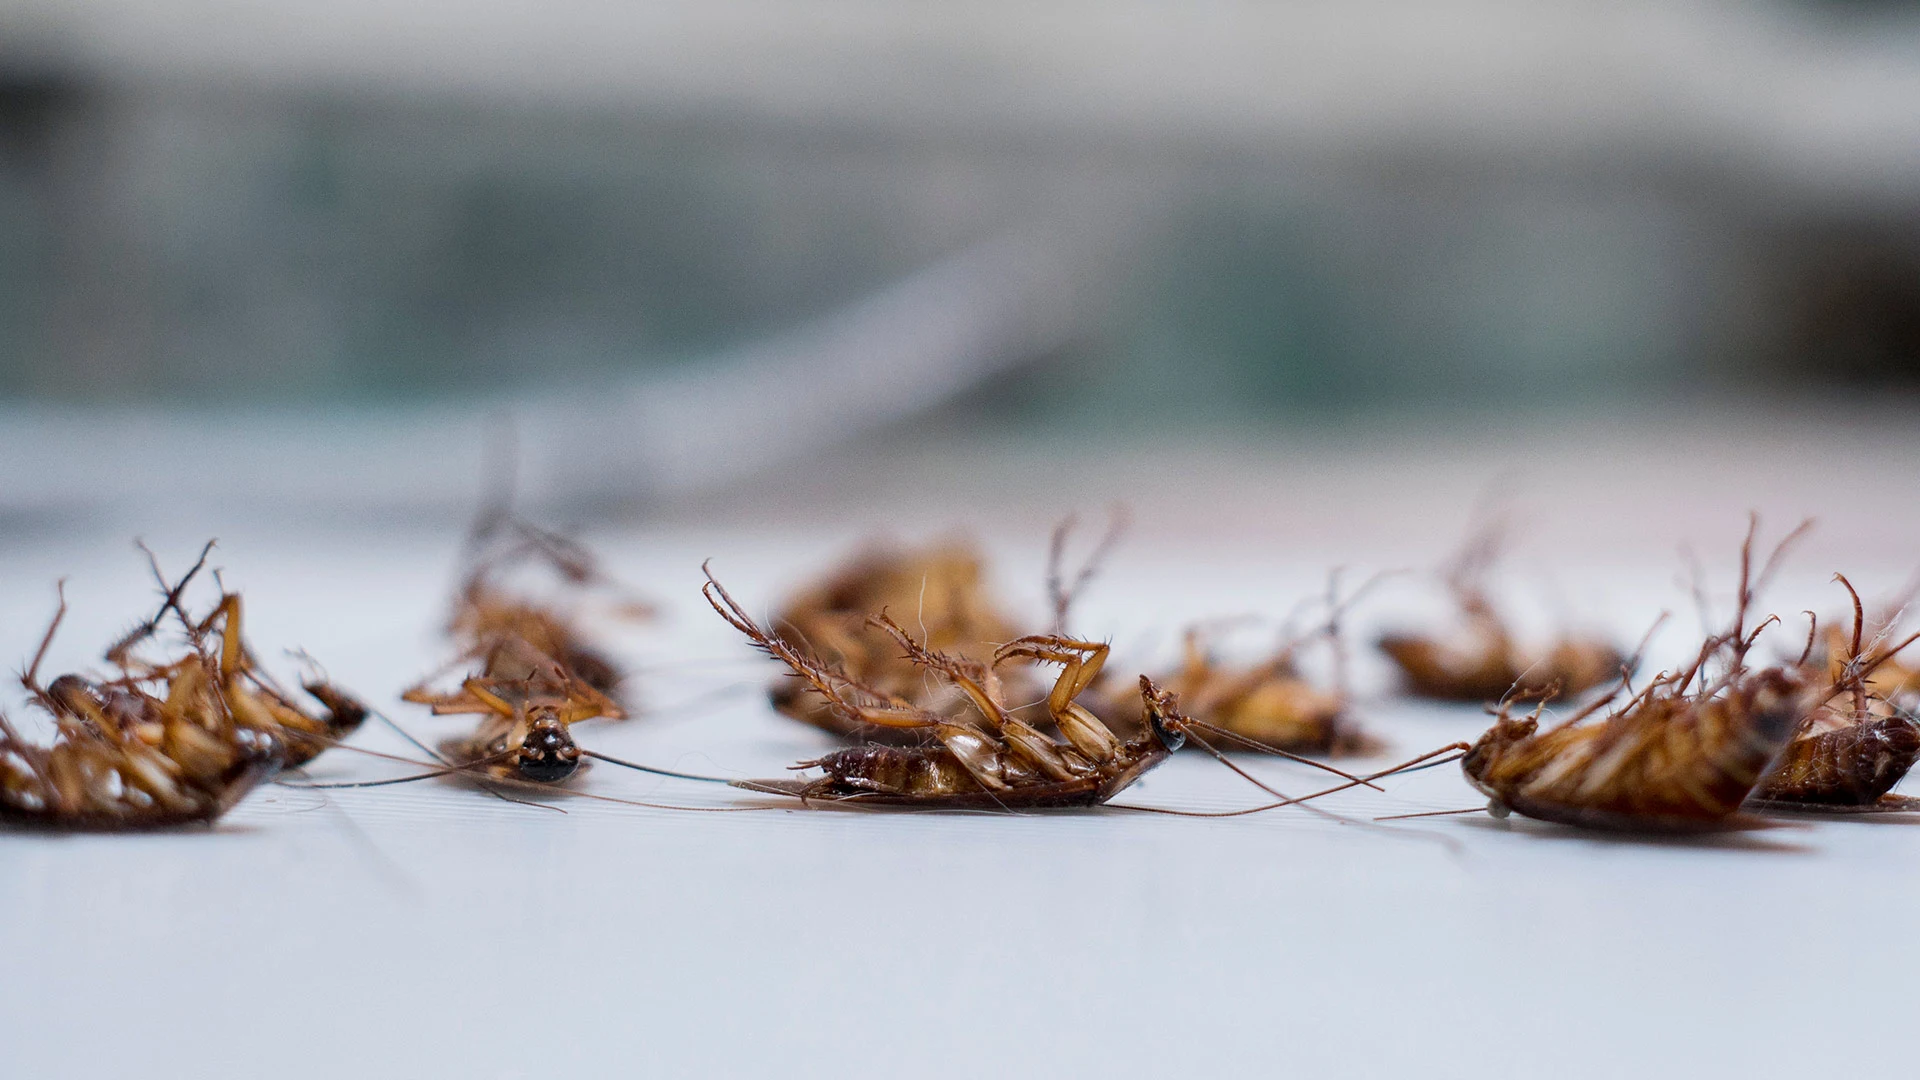 Seeing Roaches Inside of Your Home? Here’s What You Should Do